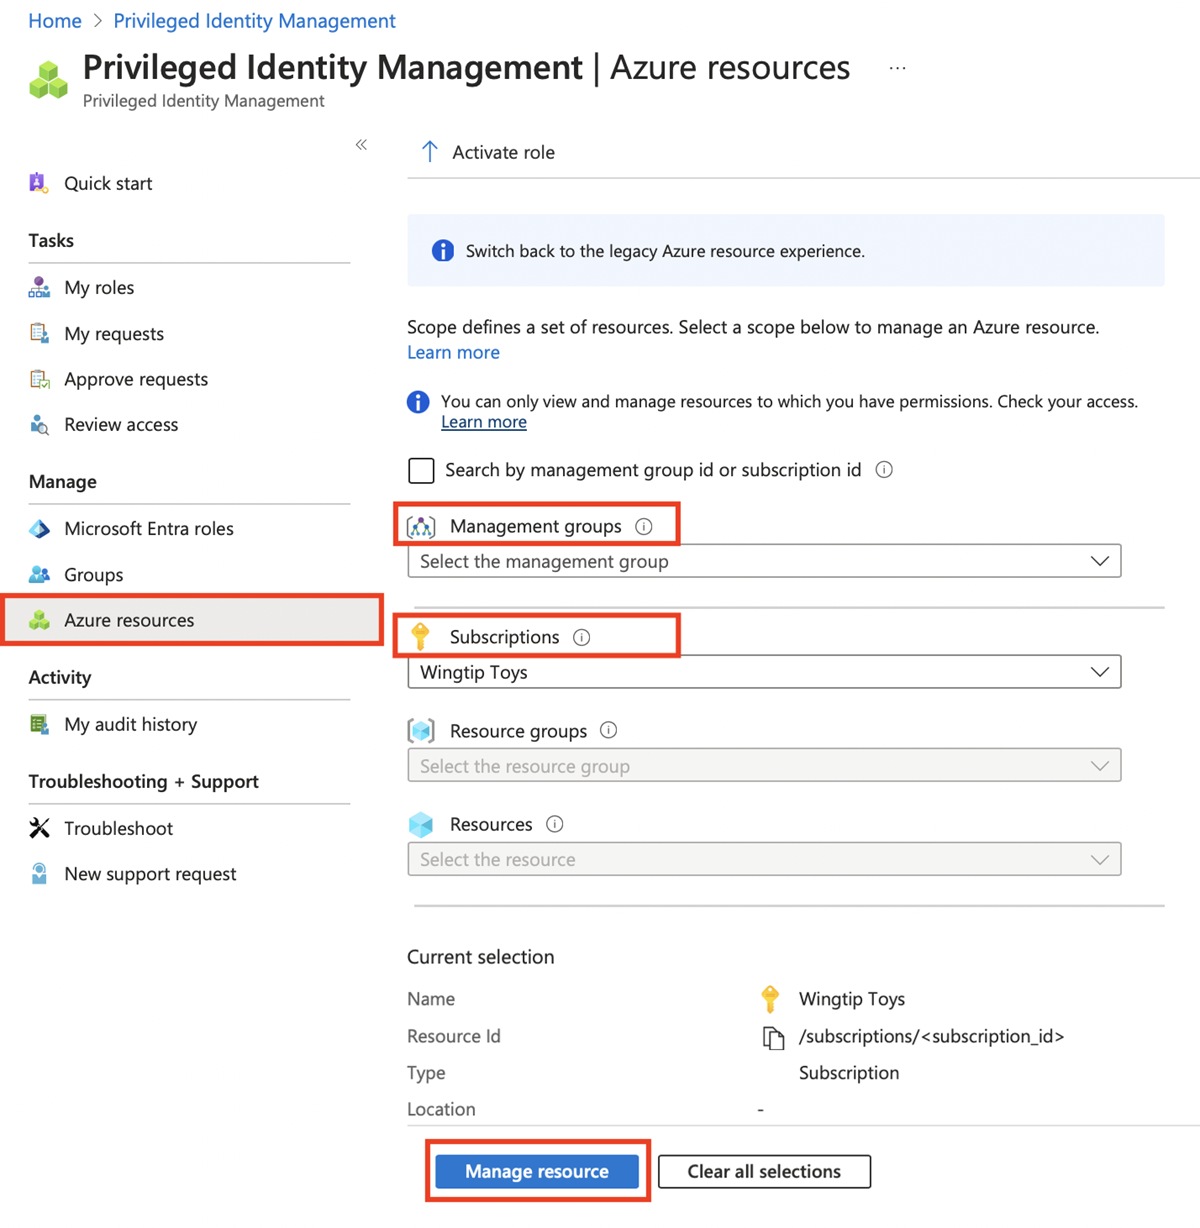 Screenshot that shows the list of Azure resources discovered in Privileged Identity Management.